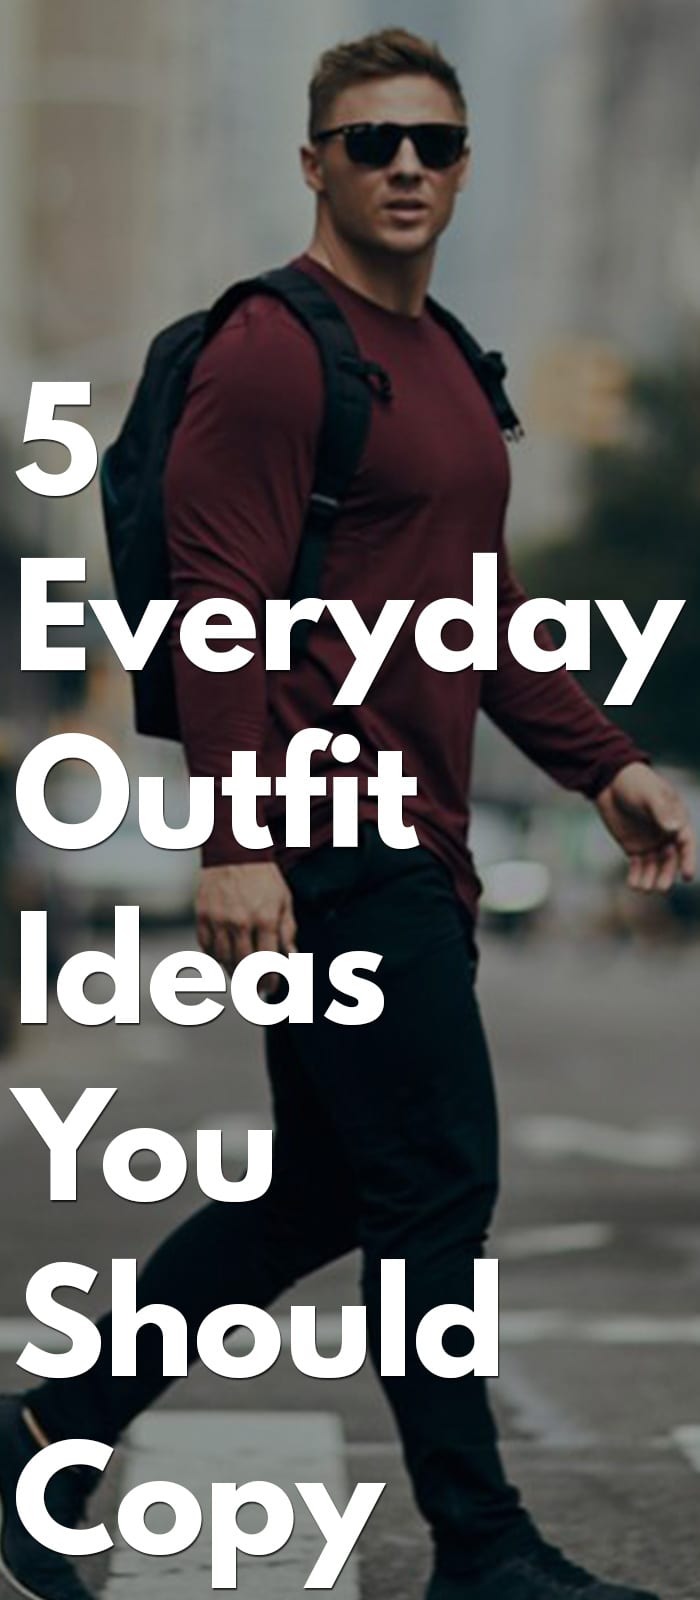 5 Must Have Everyday Outfit- Ripped Jeans, Jackets, Chinos, Shirt, Etc